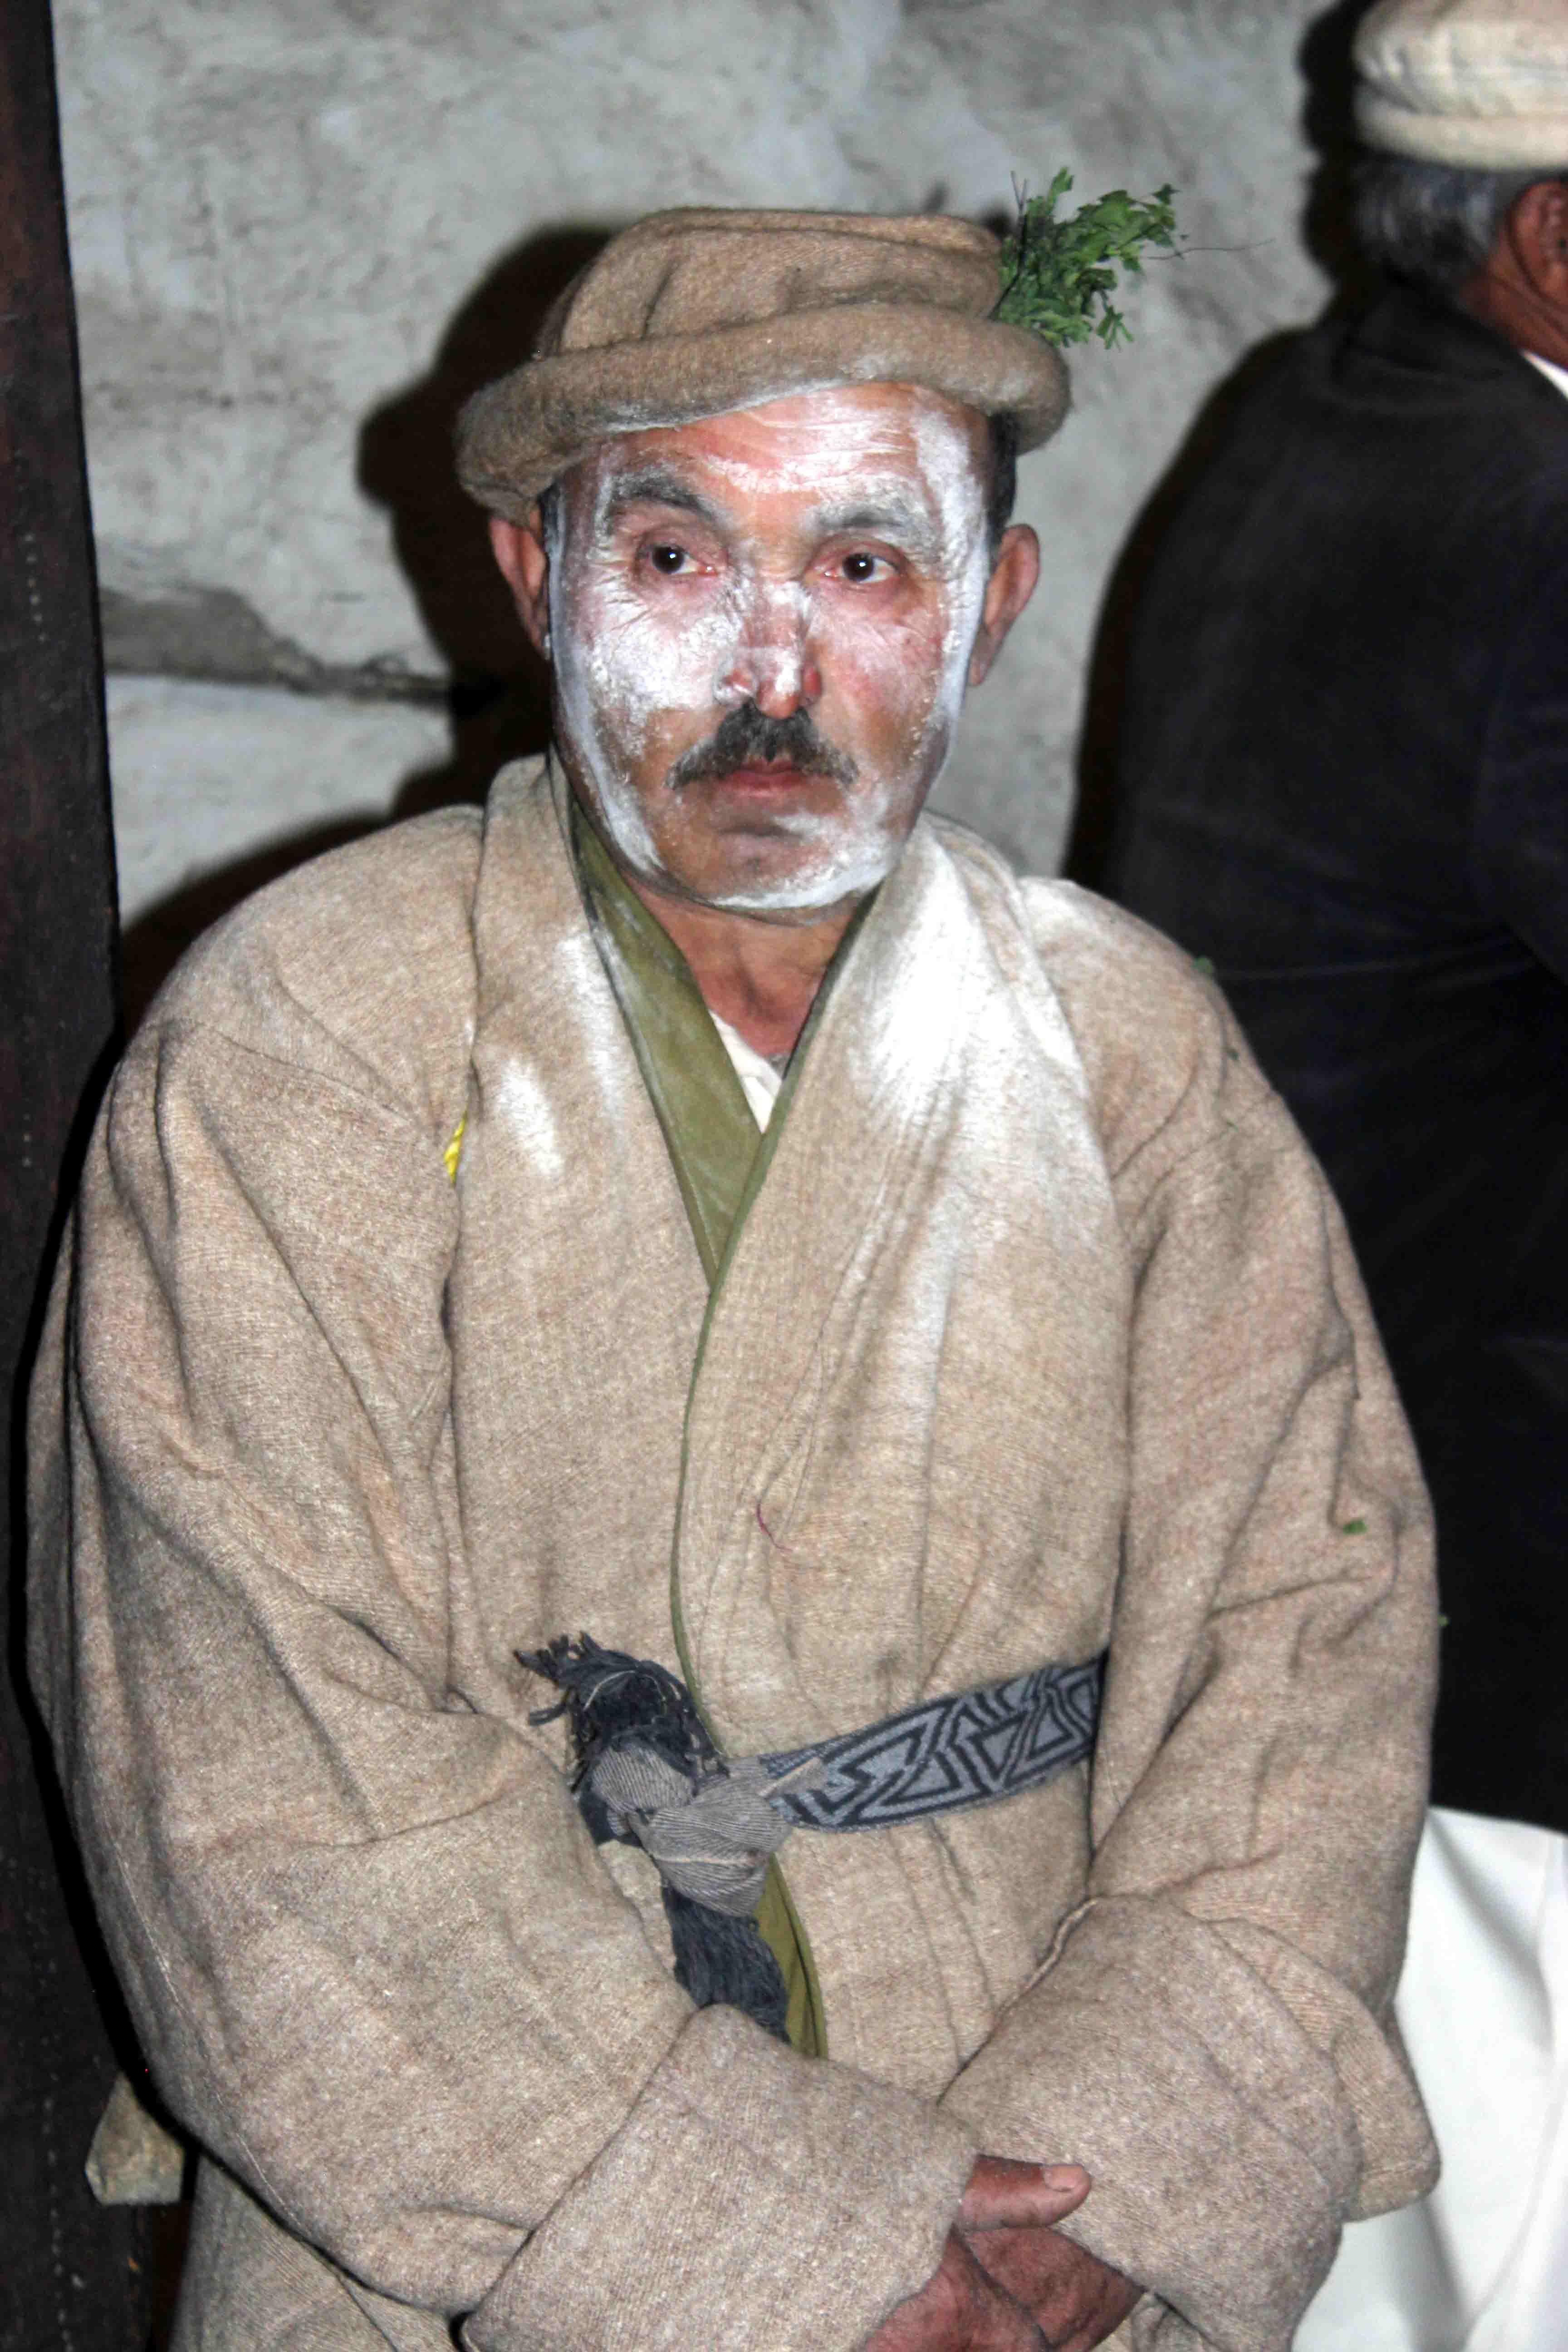 A local man dressed as a character during the festival 